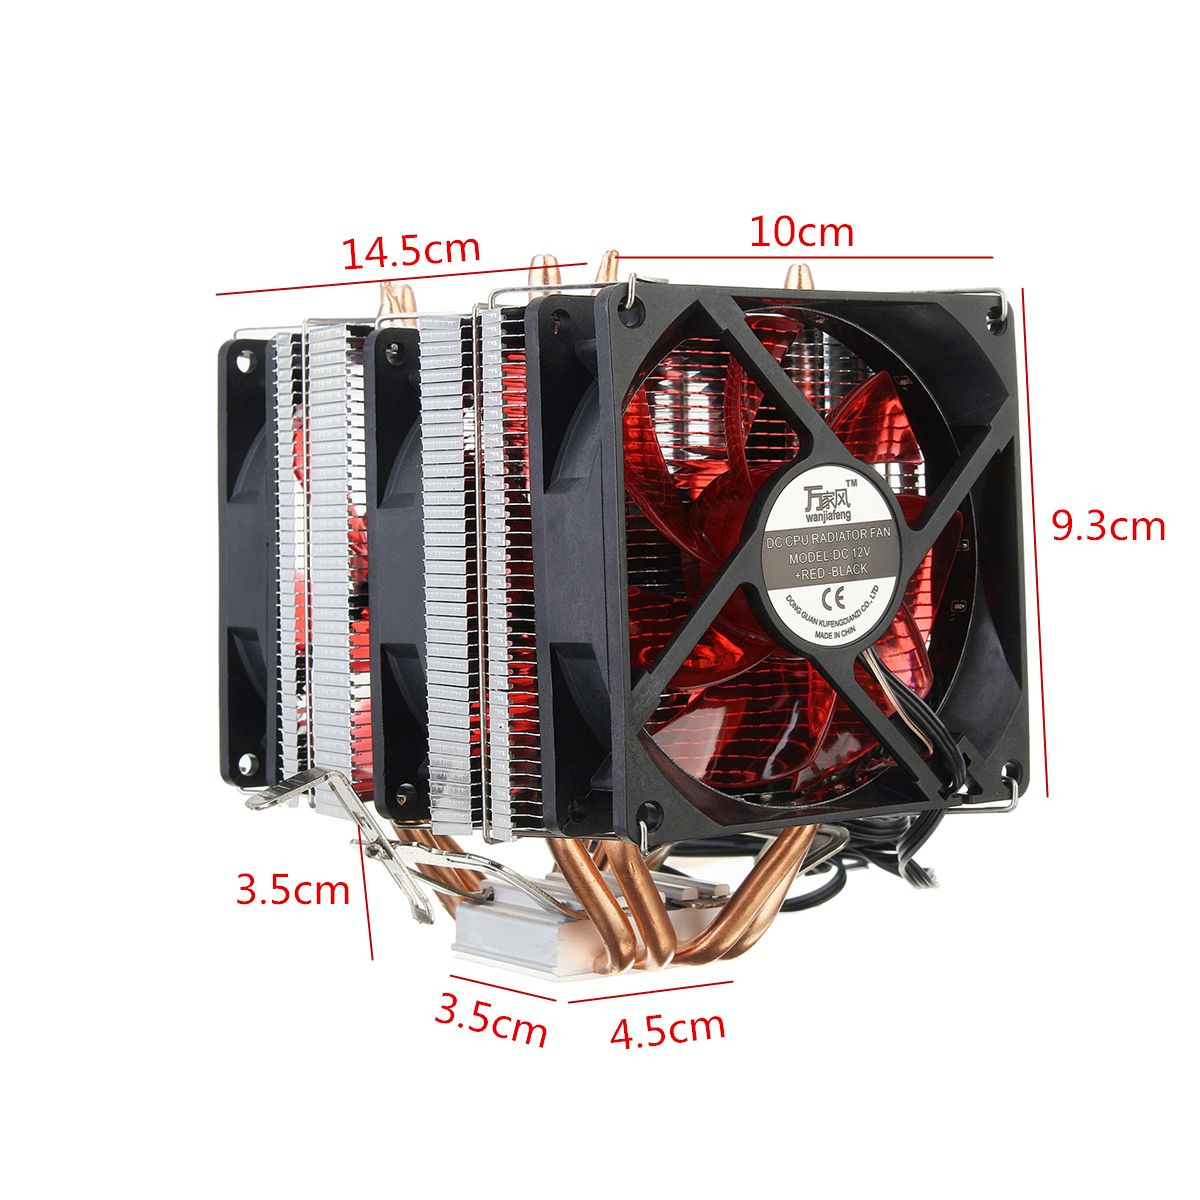 4-Heat-Pipes-Red-Led-3-CPU-Cooling-Cooler-Fan-Heat-Sink-for-AMD-AM22-AM3-Intel-LGA-1156-1190677